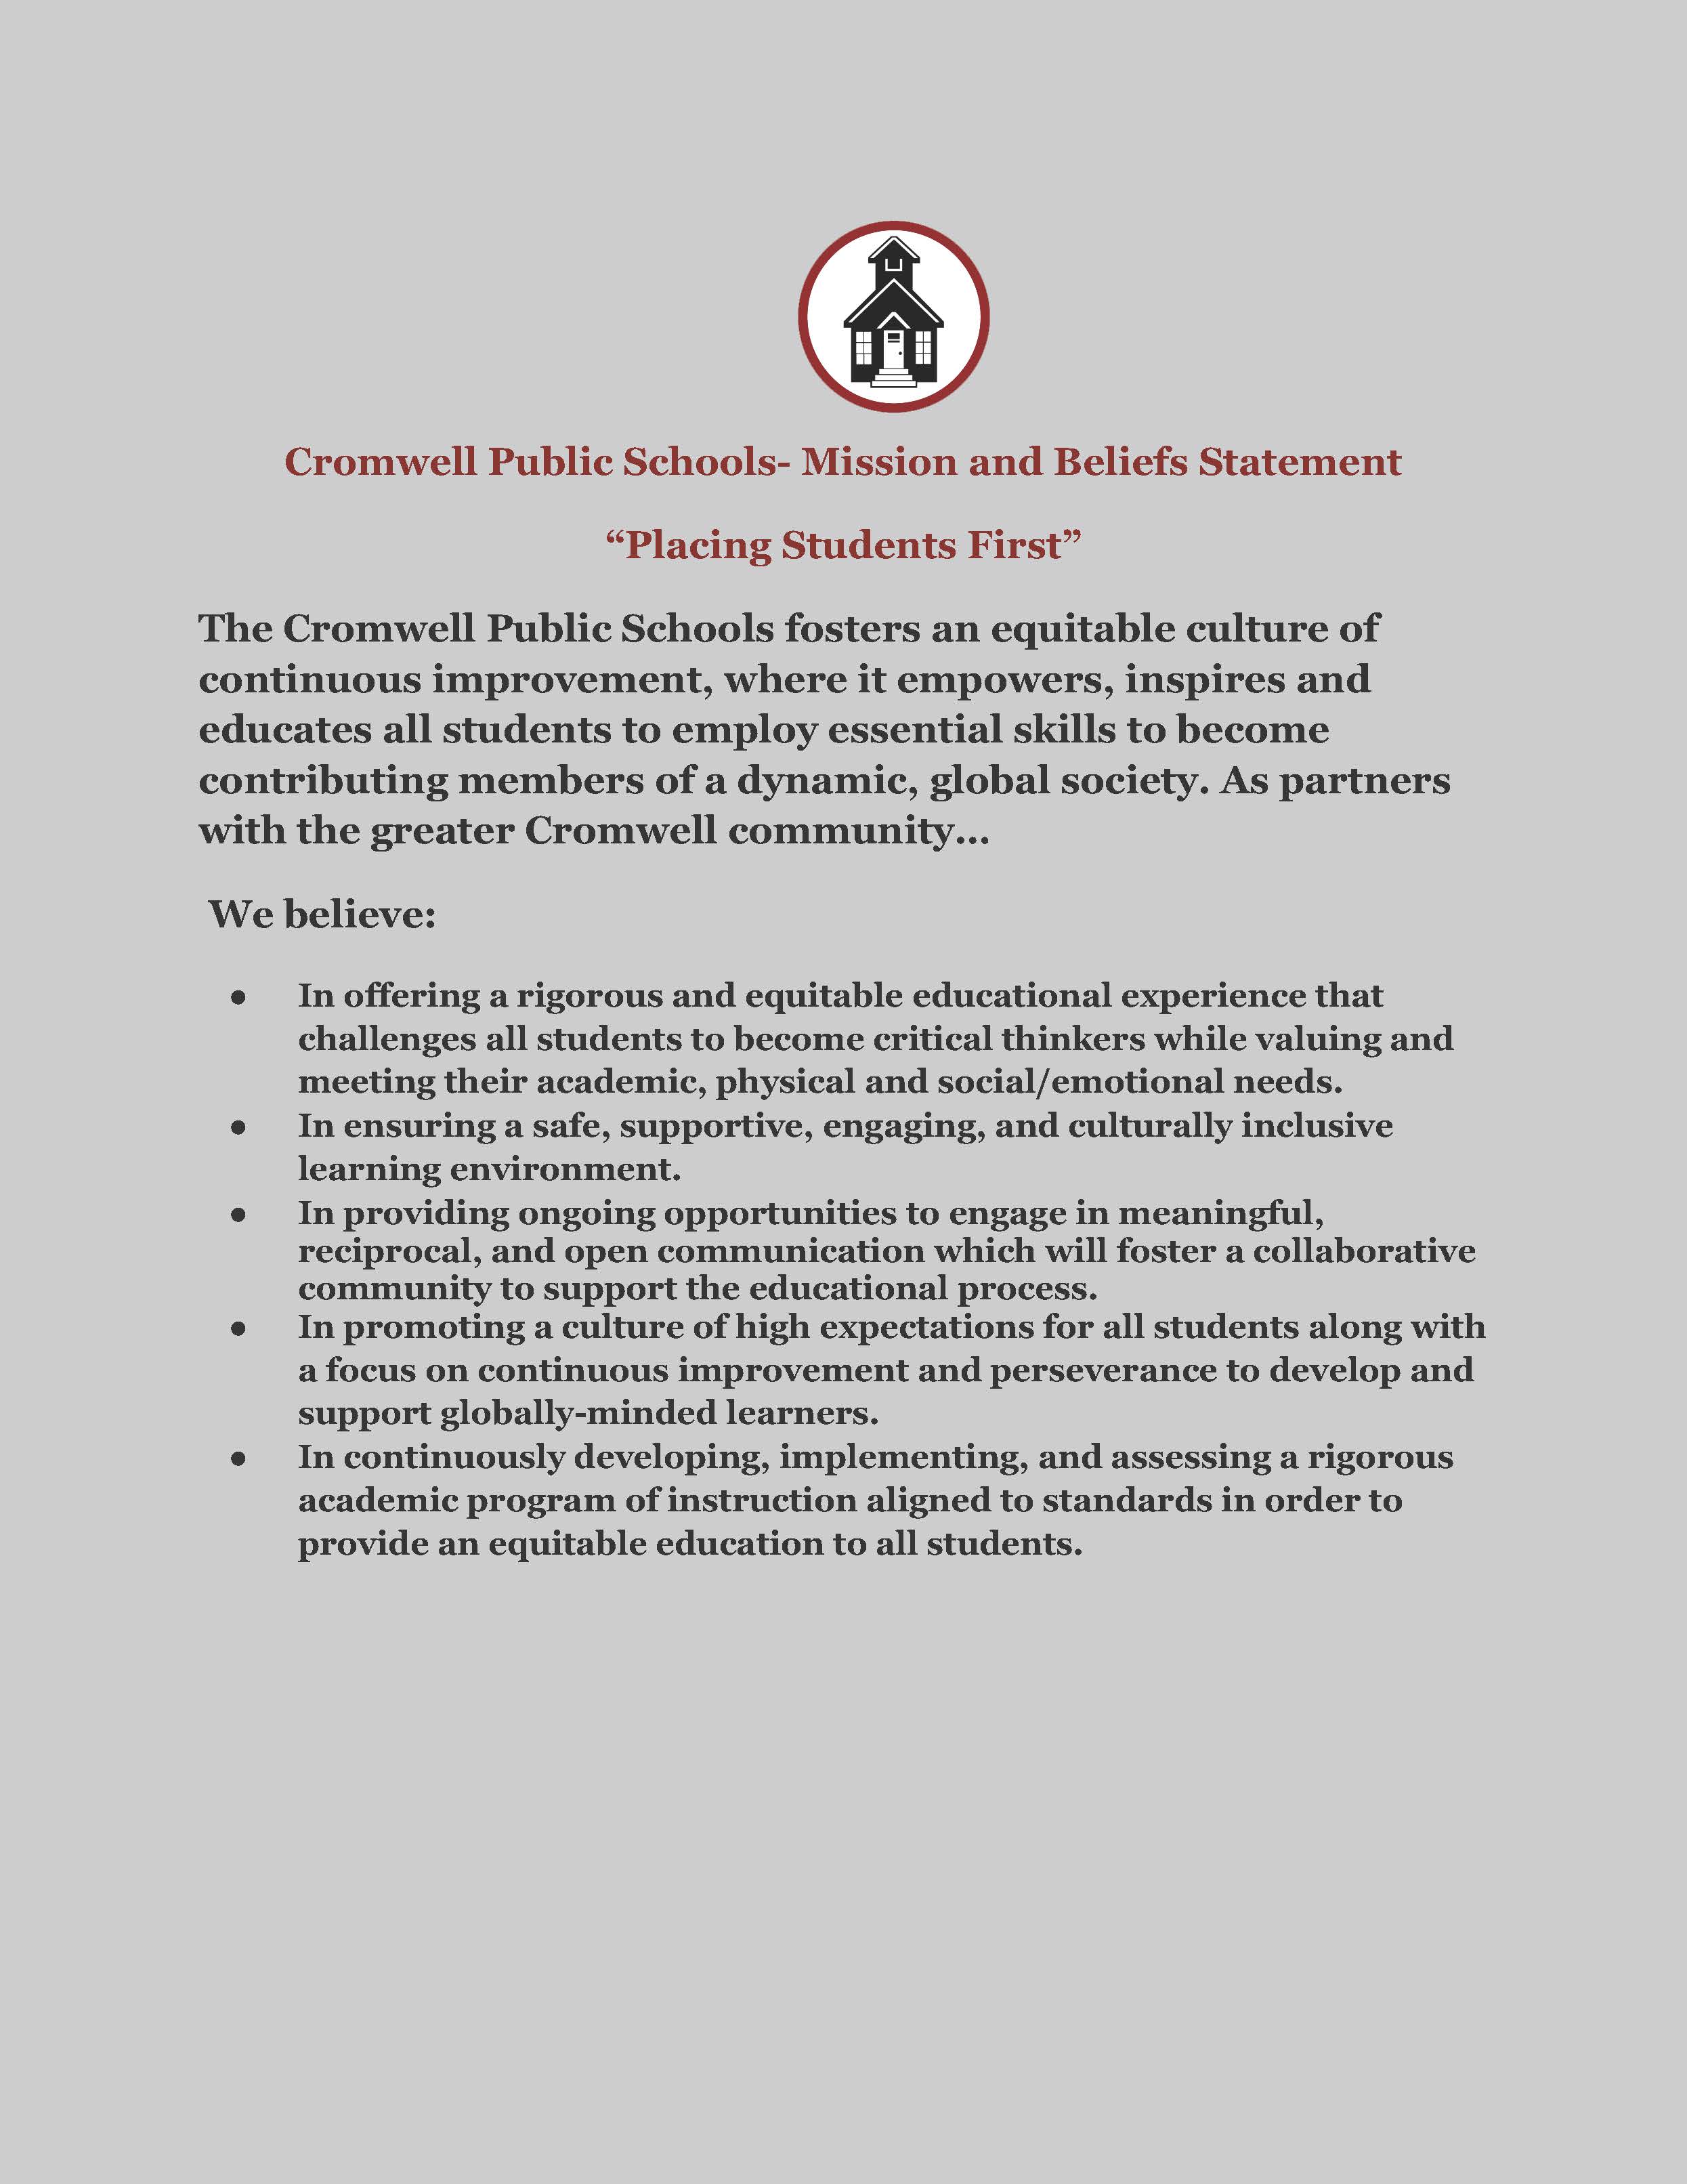 Cromwell Public Schools - Mission and Beliefs Statement